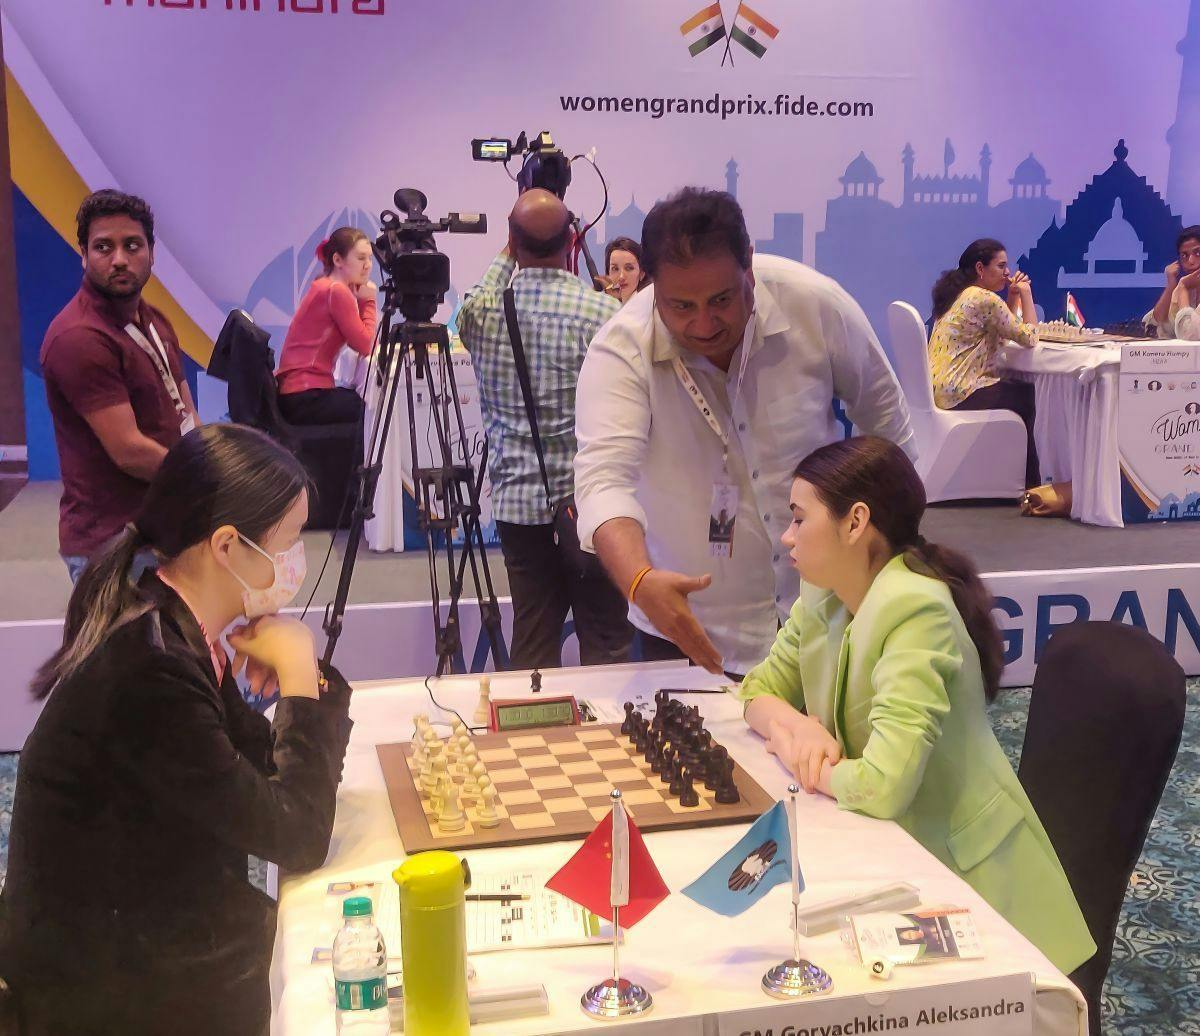 Indian Chess Players' Unsuccessful Performance at the FIDE Grand Prix 2022